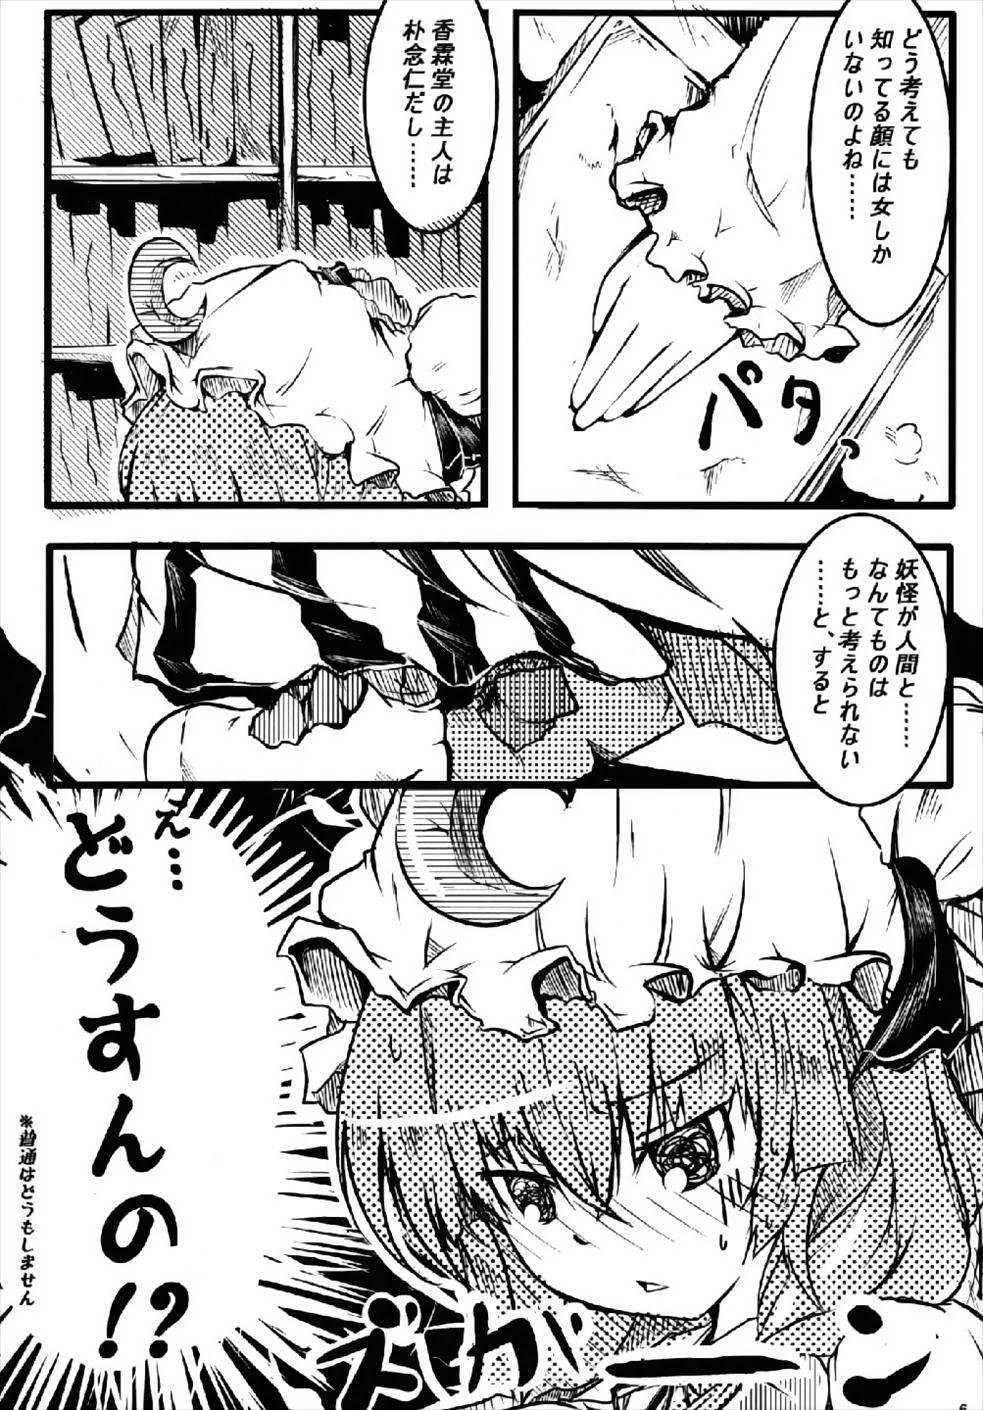 Lezdom RemiFlaPatche! - Touhou project Couple Fucking - Page 5